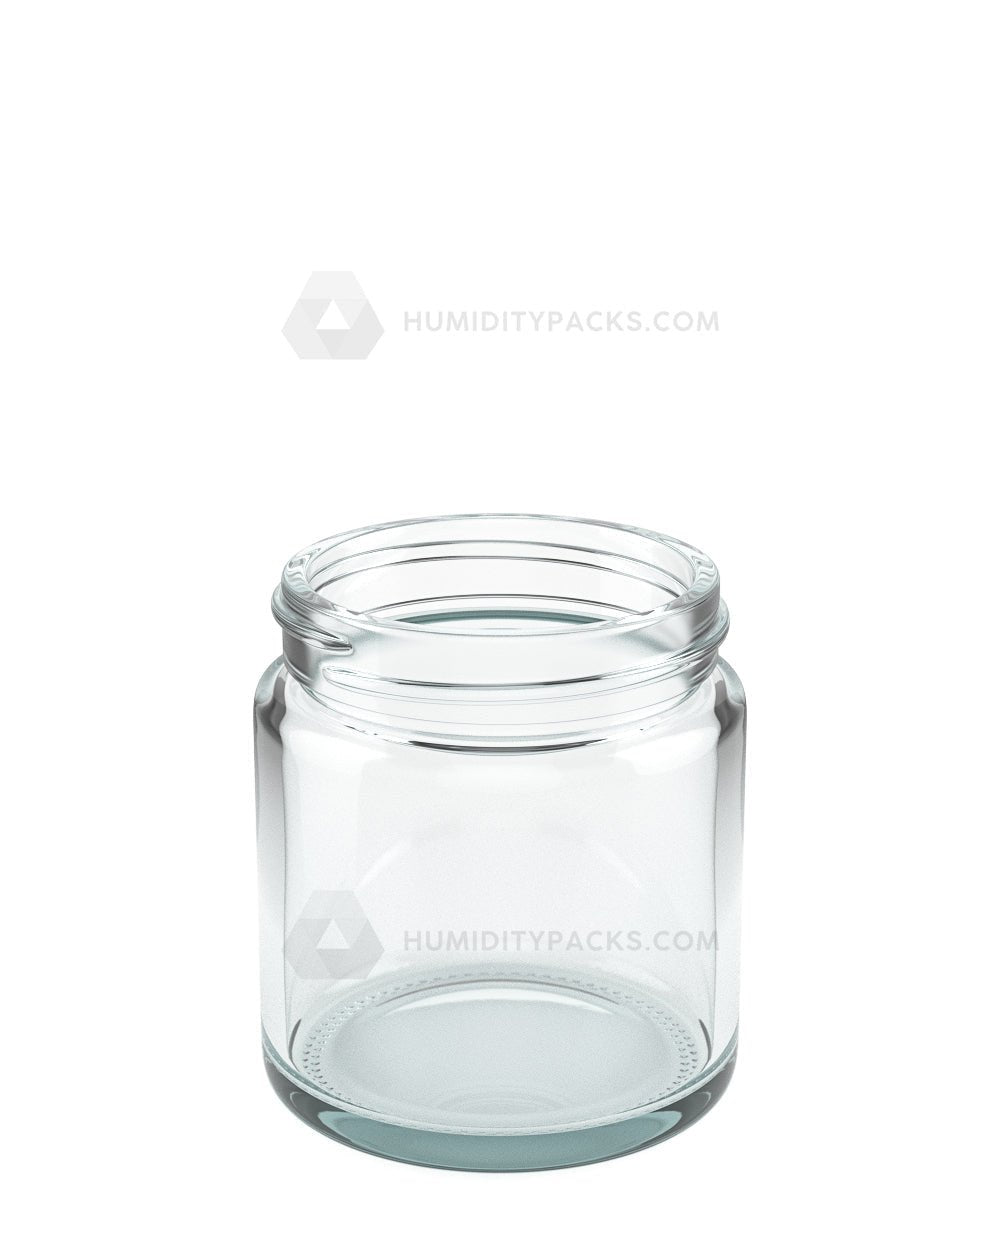 50 Pack) 3oz Thick Glass Container with Black Child Resistant Lid